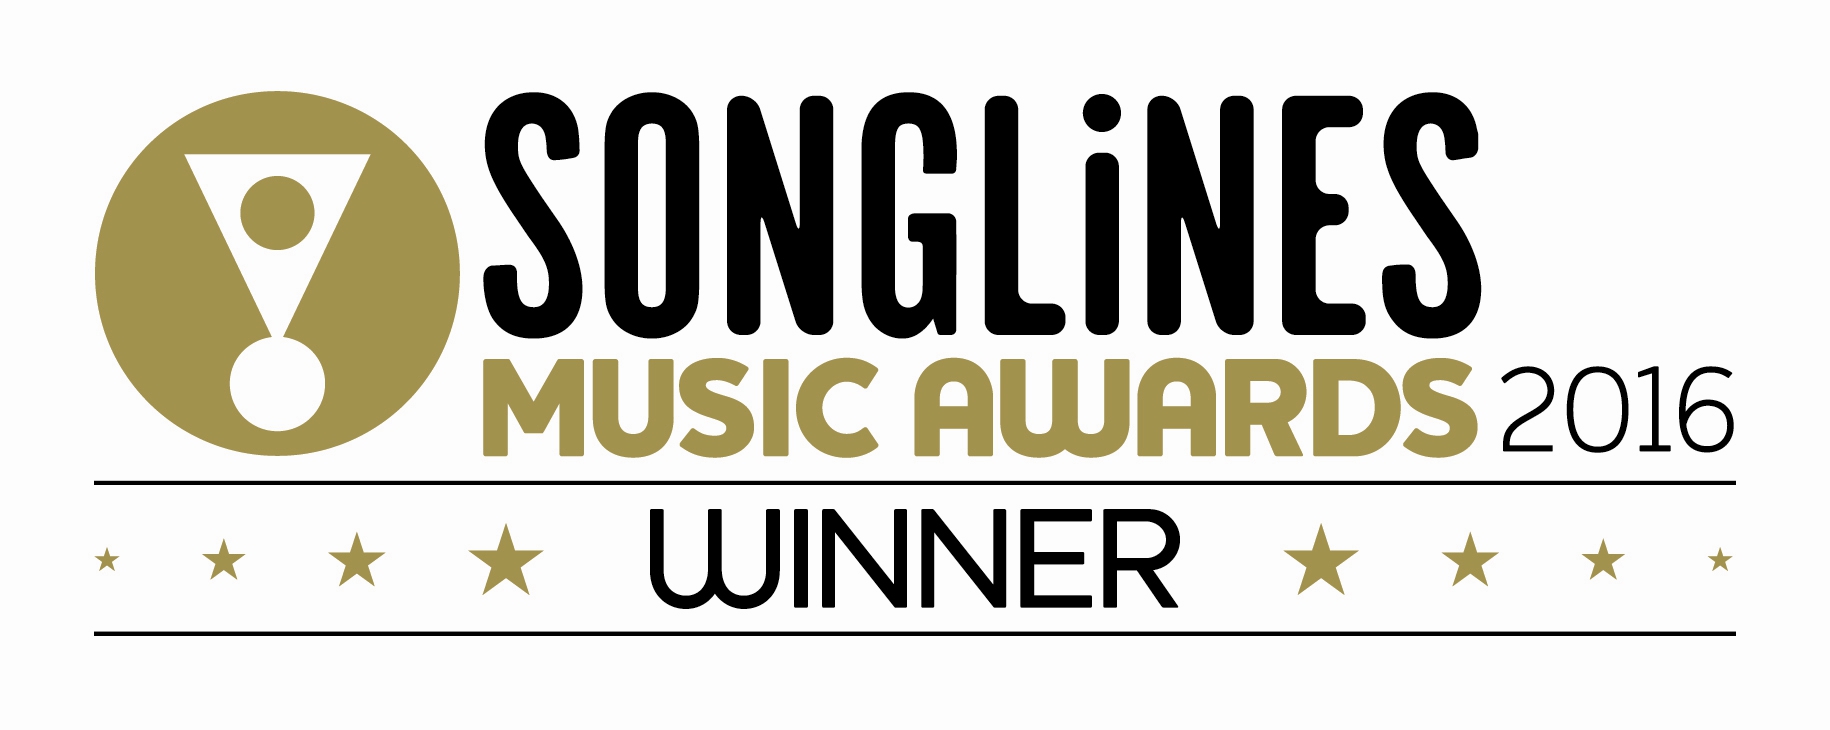 Songlines music awards banner